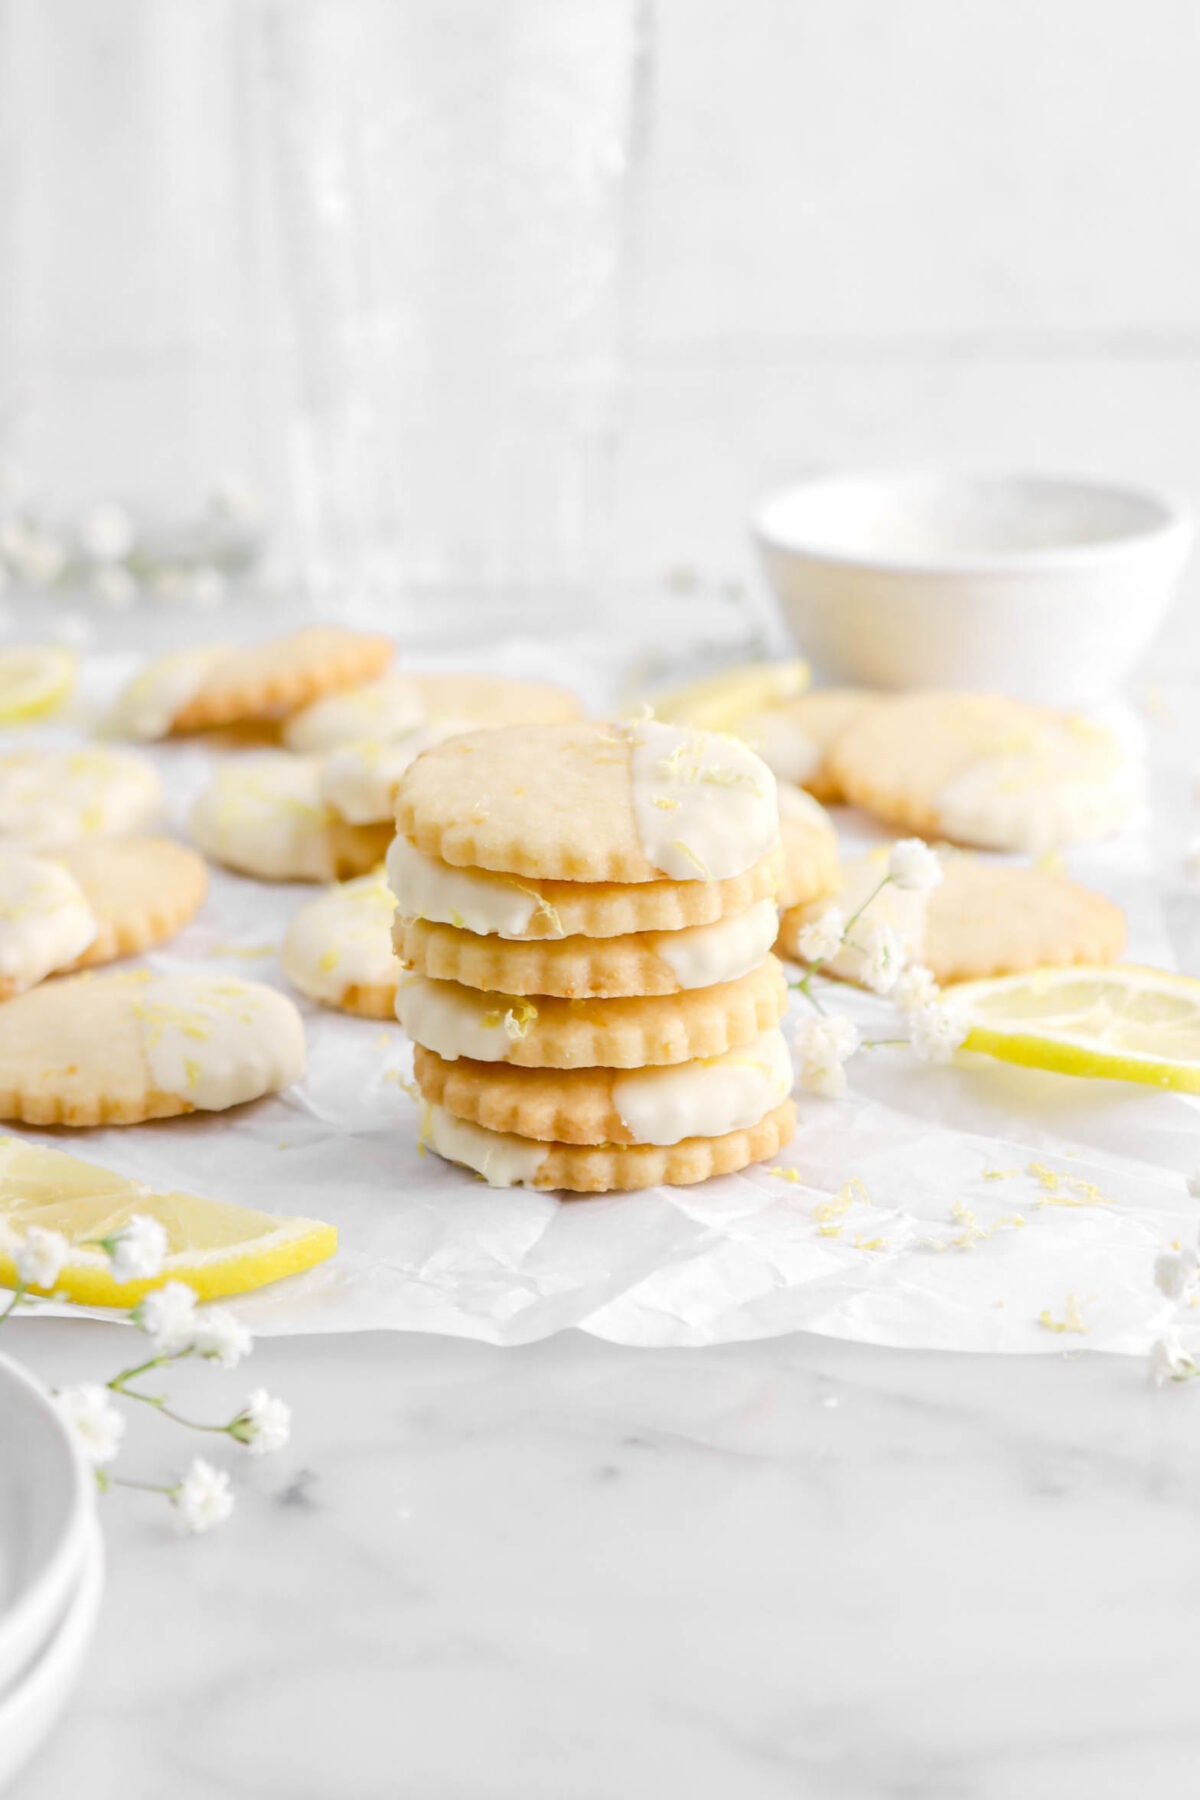 angled shot of six stacked cookies on parchment paper with white flowers and lemon slices around, more cookies behind, a small white bowl, and two empty glasses.